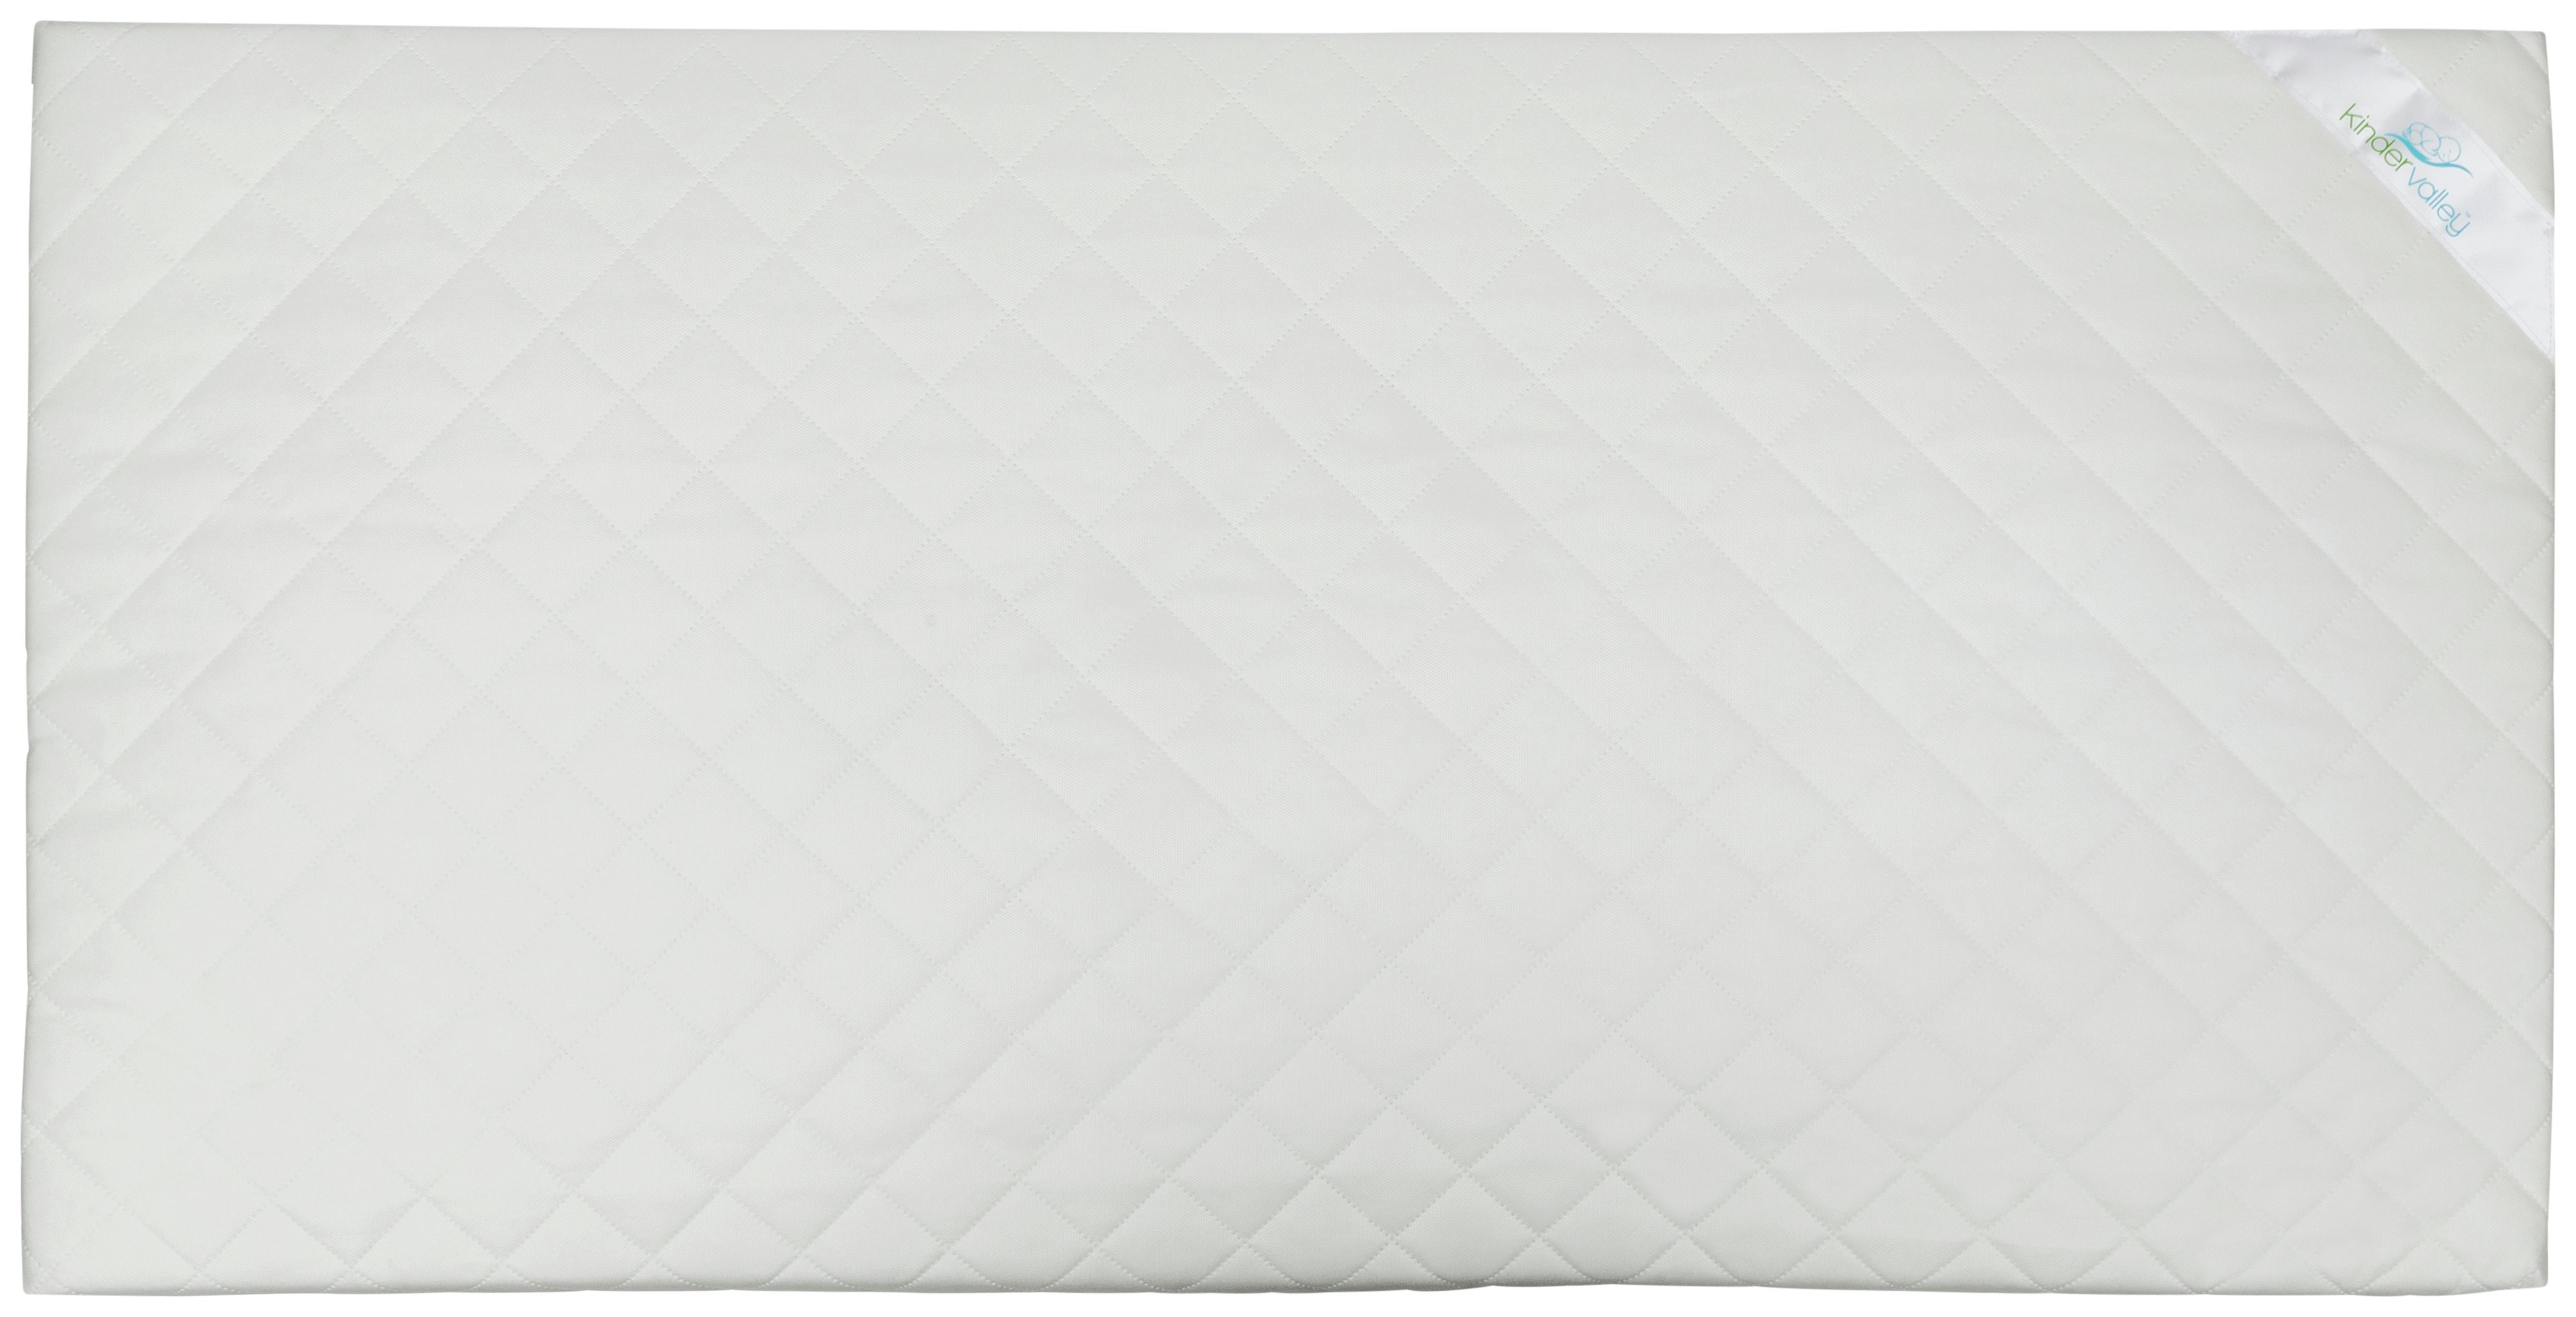 kinder valley deluxe spring cot bed mattress